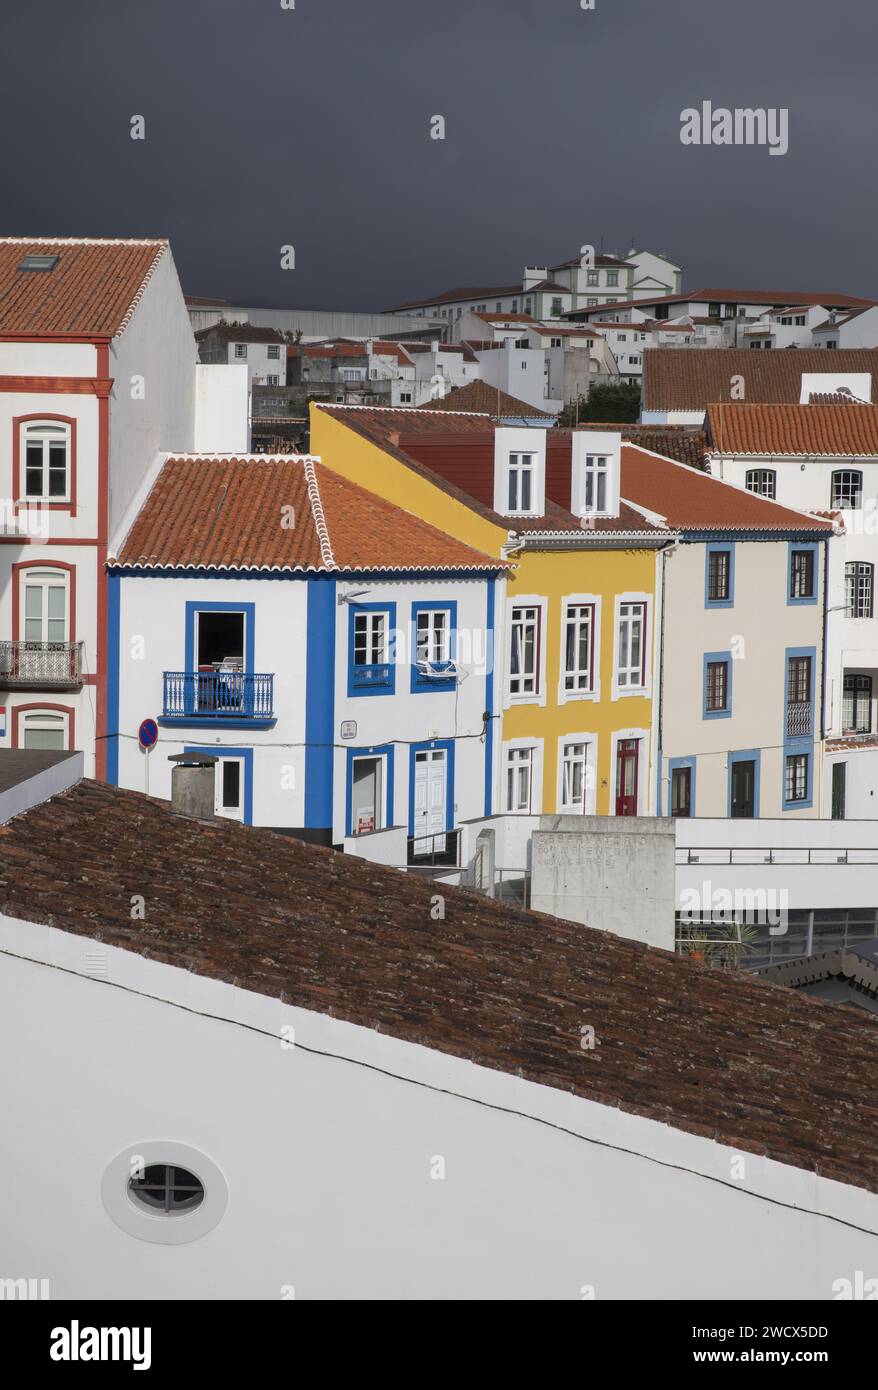 Portugal, Azores archipelago, Terceira island, Angra do Heroismo, colorful facades of colonial buildings with tiled roofs in the historic center Stock Photo